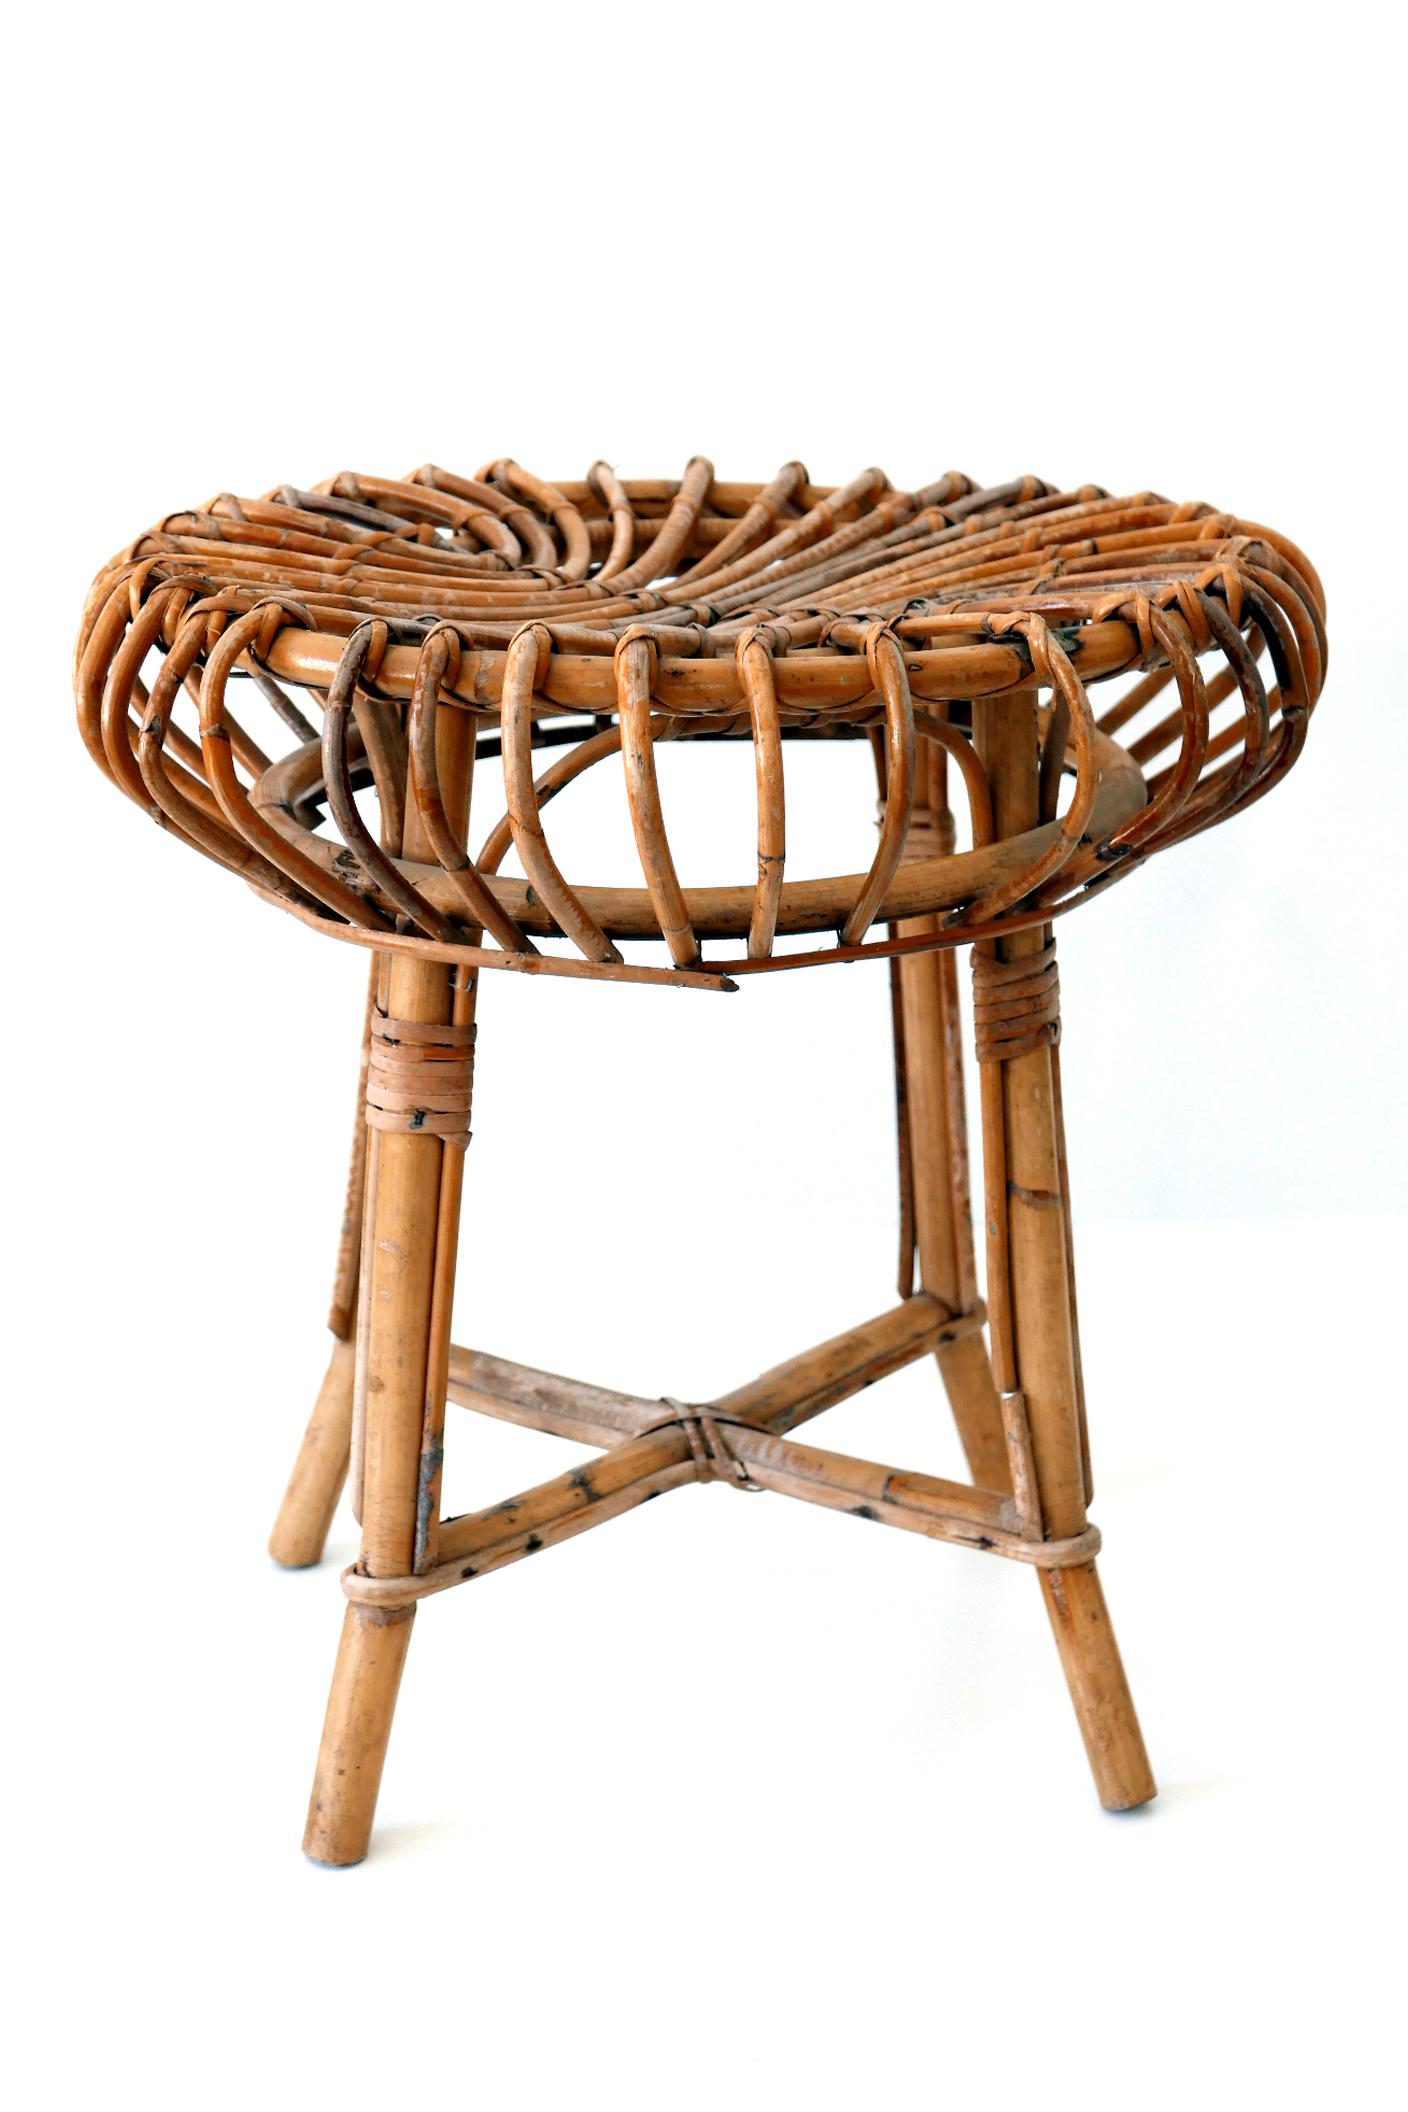 Lovely Mid-Century Modern wicker stool. Manufactured in 1950s, Italy. 
Executed in wicker and bamboo.

Fair condition. Wear consistent with use and age.